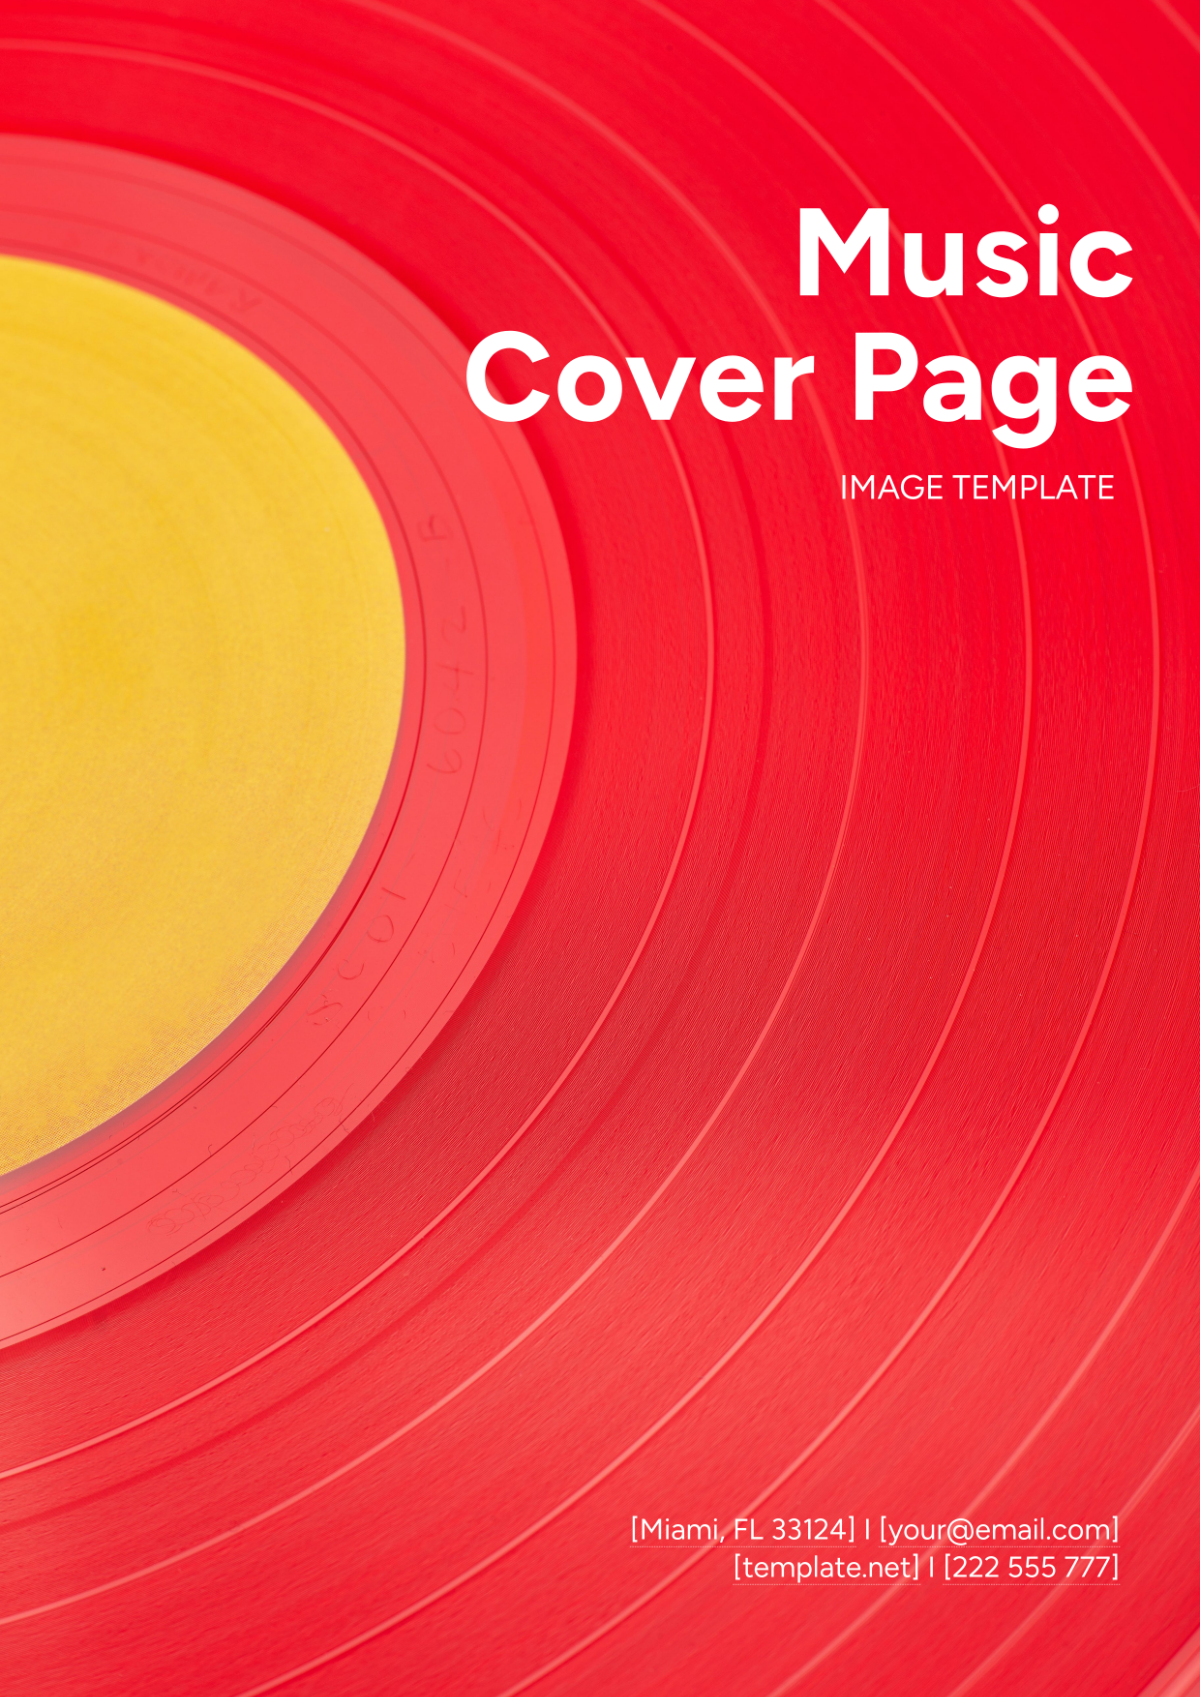 Music Cover Page Image